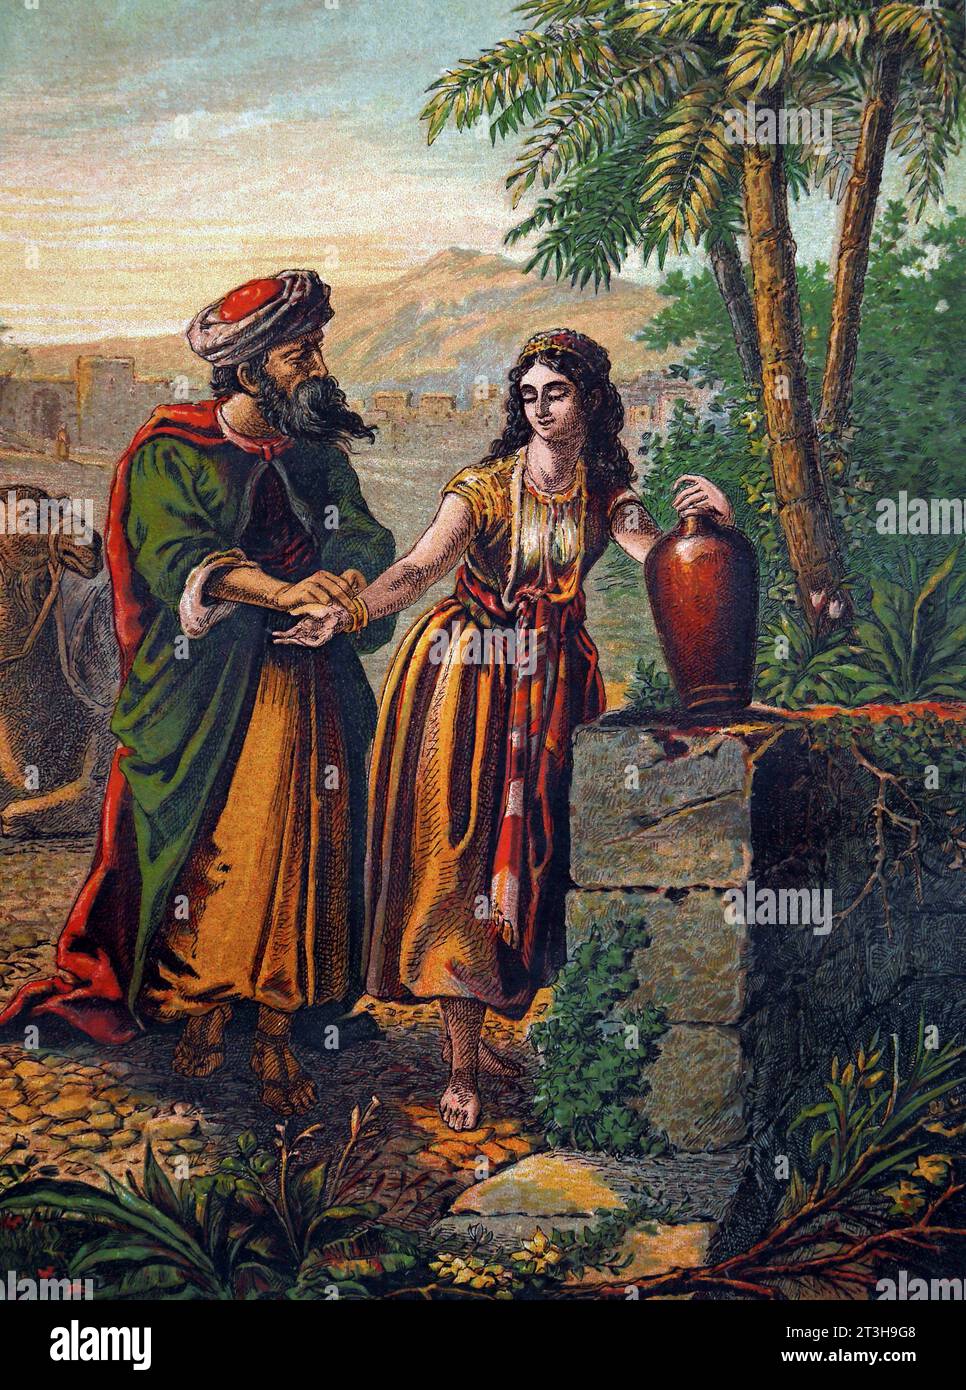 Bible Stories- Illustration Of Rebekah offering water to Abraham's servant Eliezer By The Well In The Story of Isaac Genesis Stock Photo